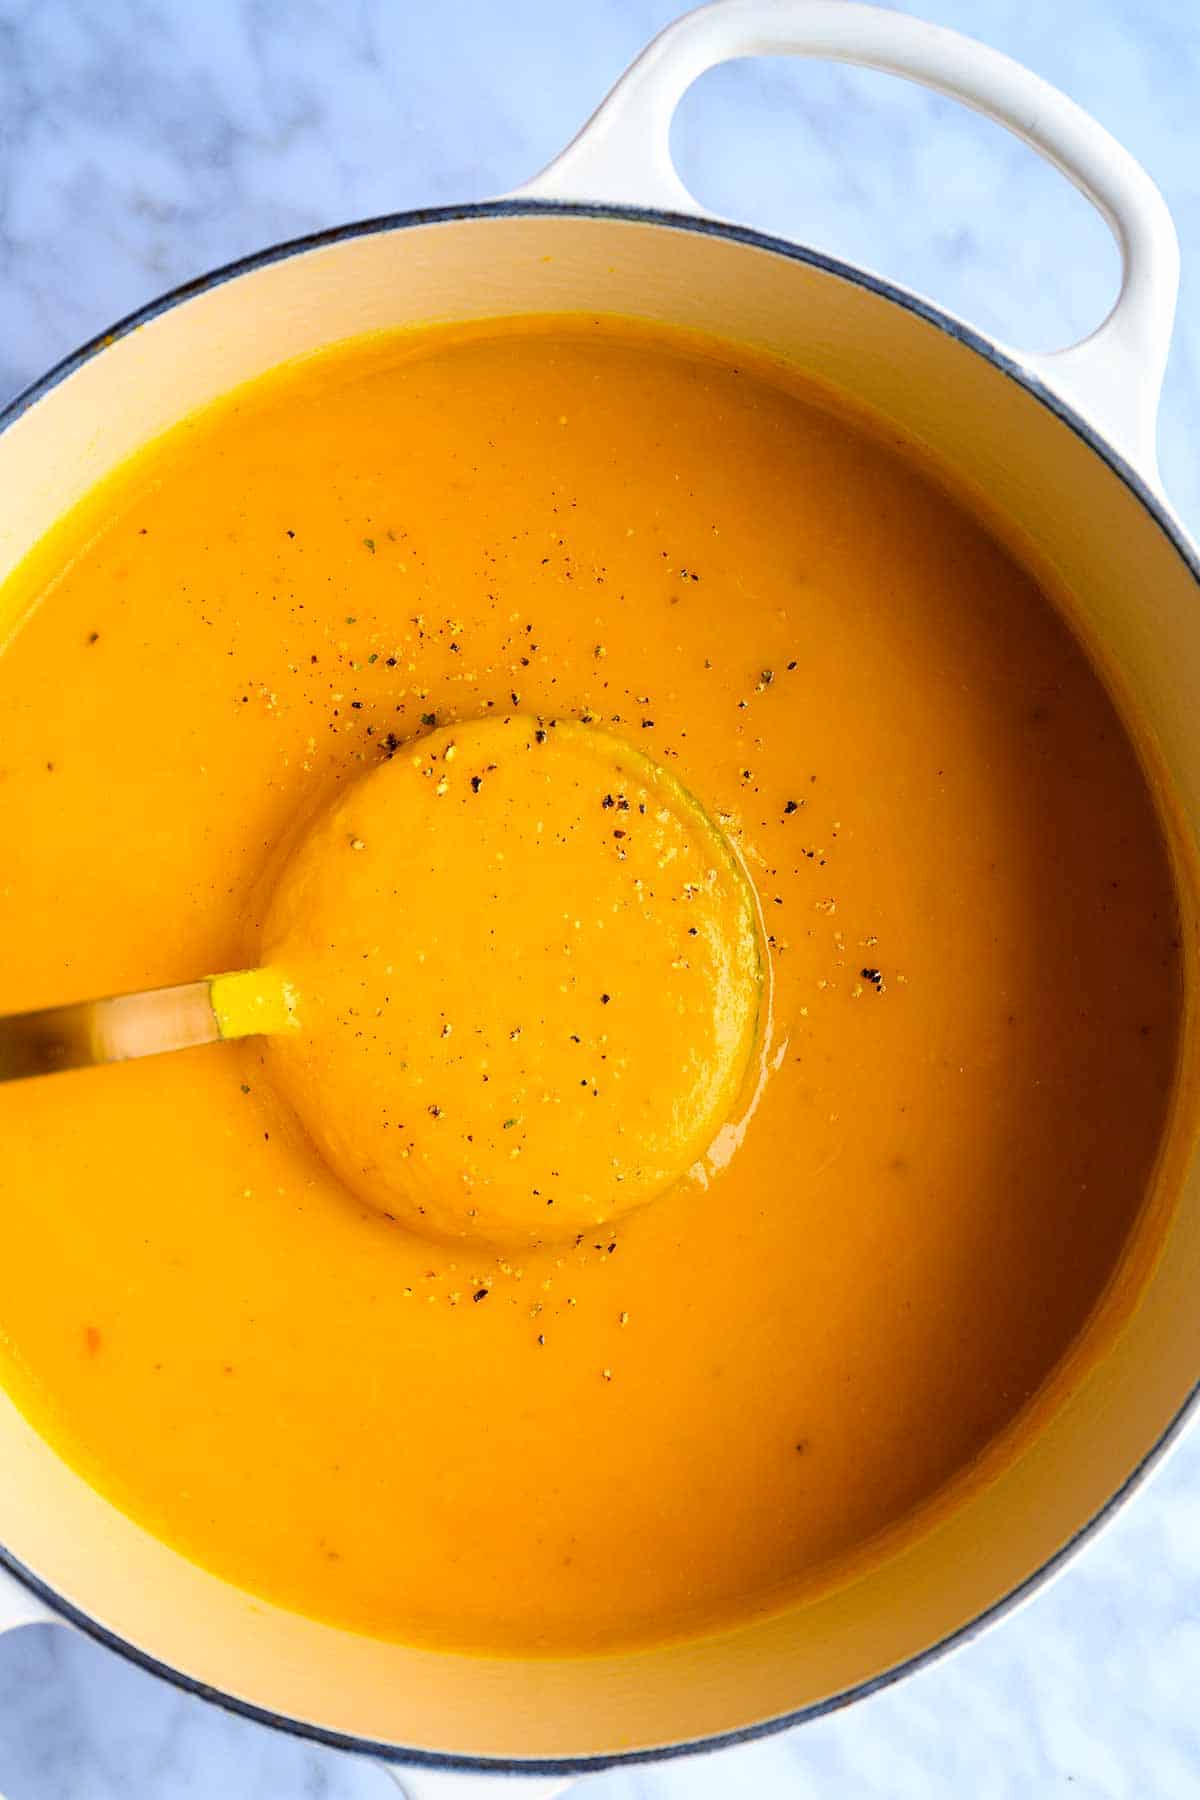 This easy butternut squash soup is unbelievably creamy, satisfying, and so flavorful. It's also very simple to make, delicious when made in advance, and naturally vegan.